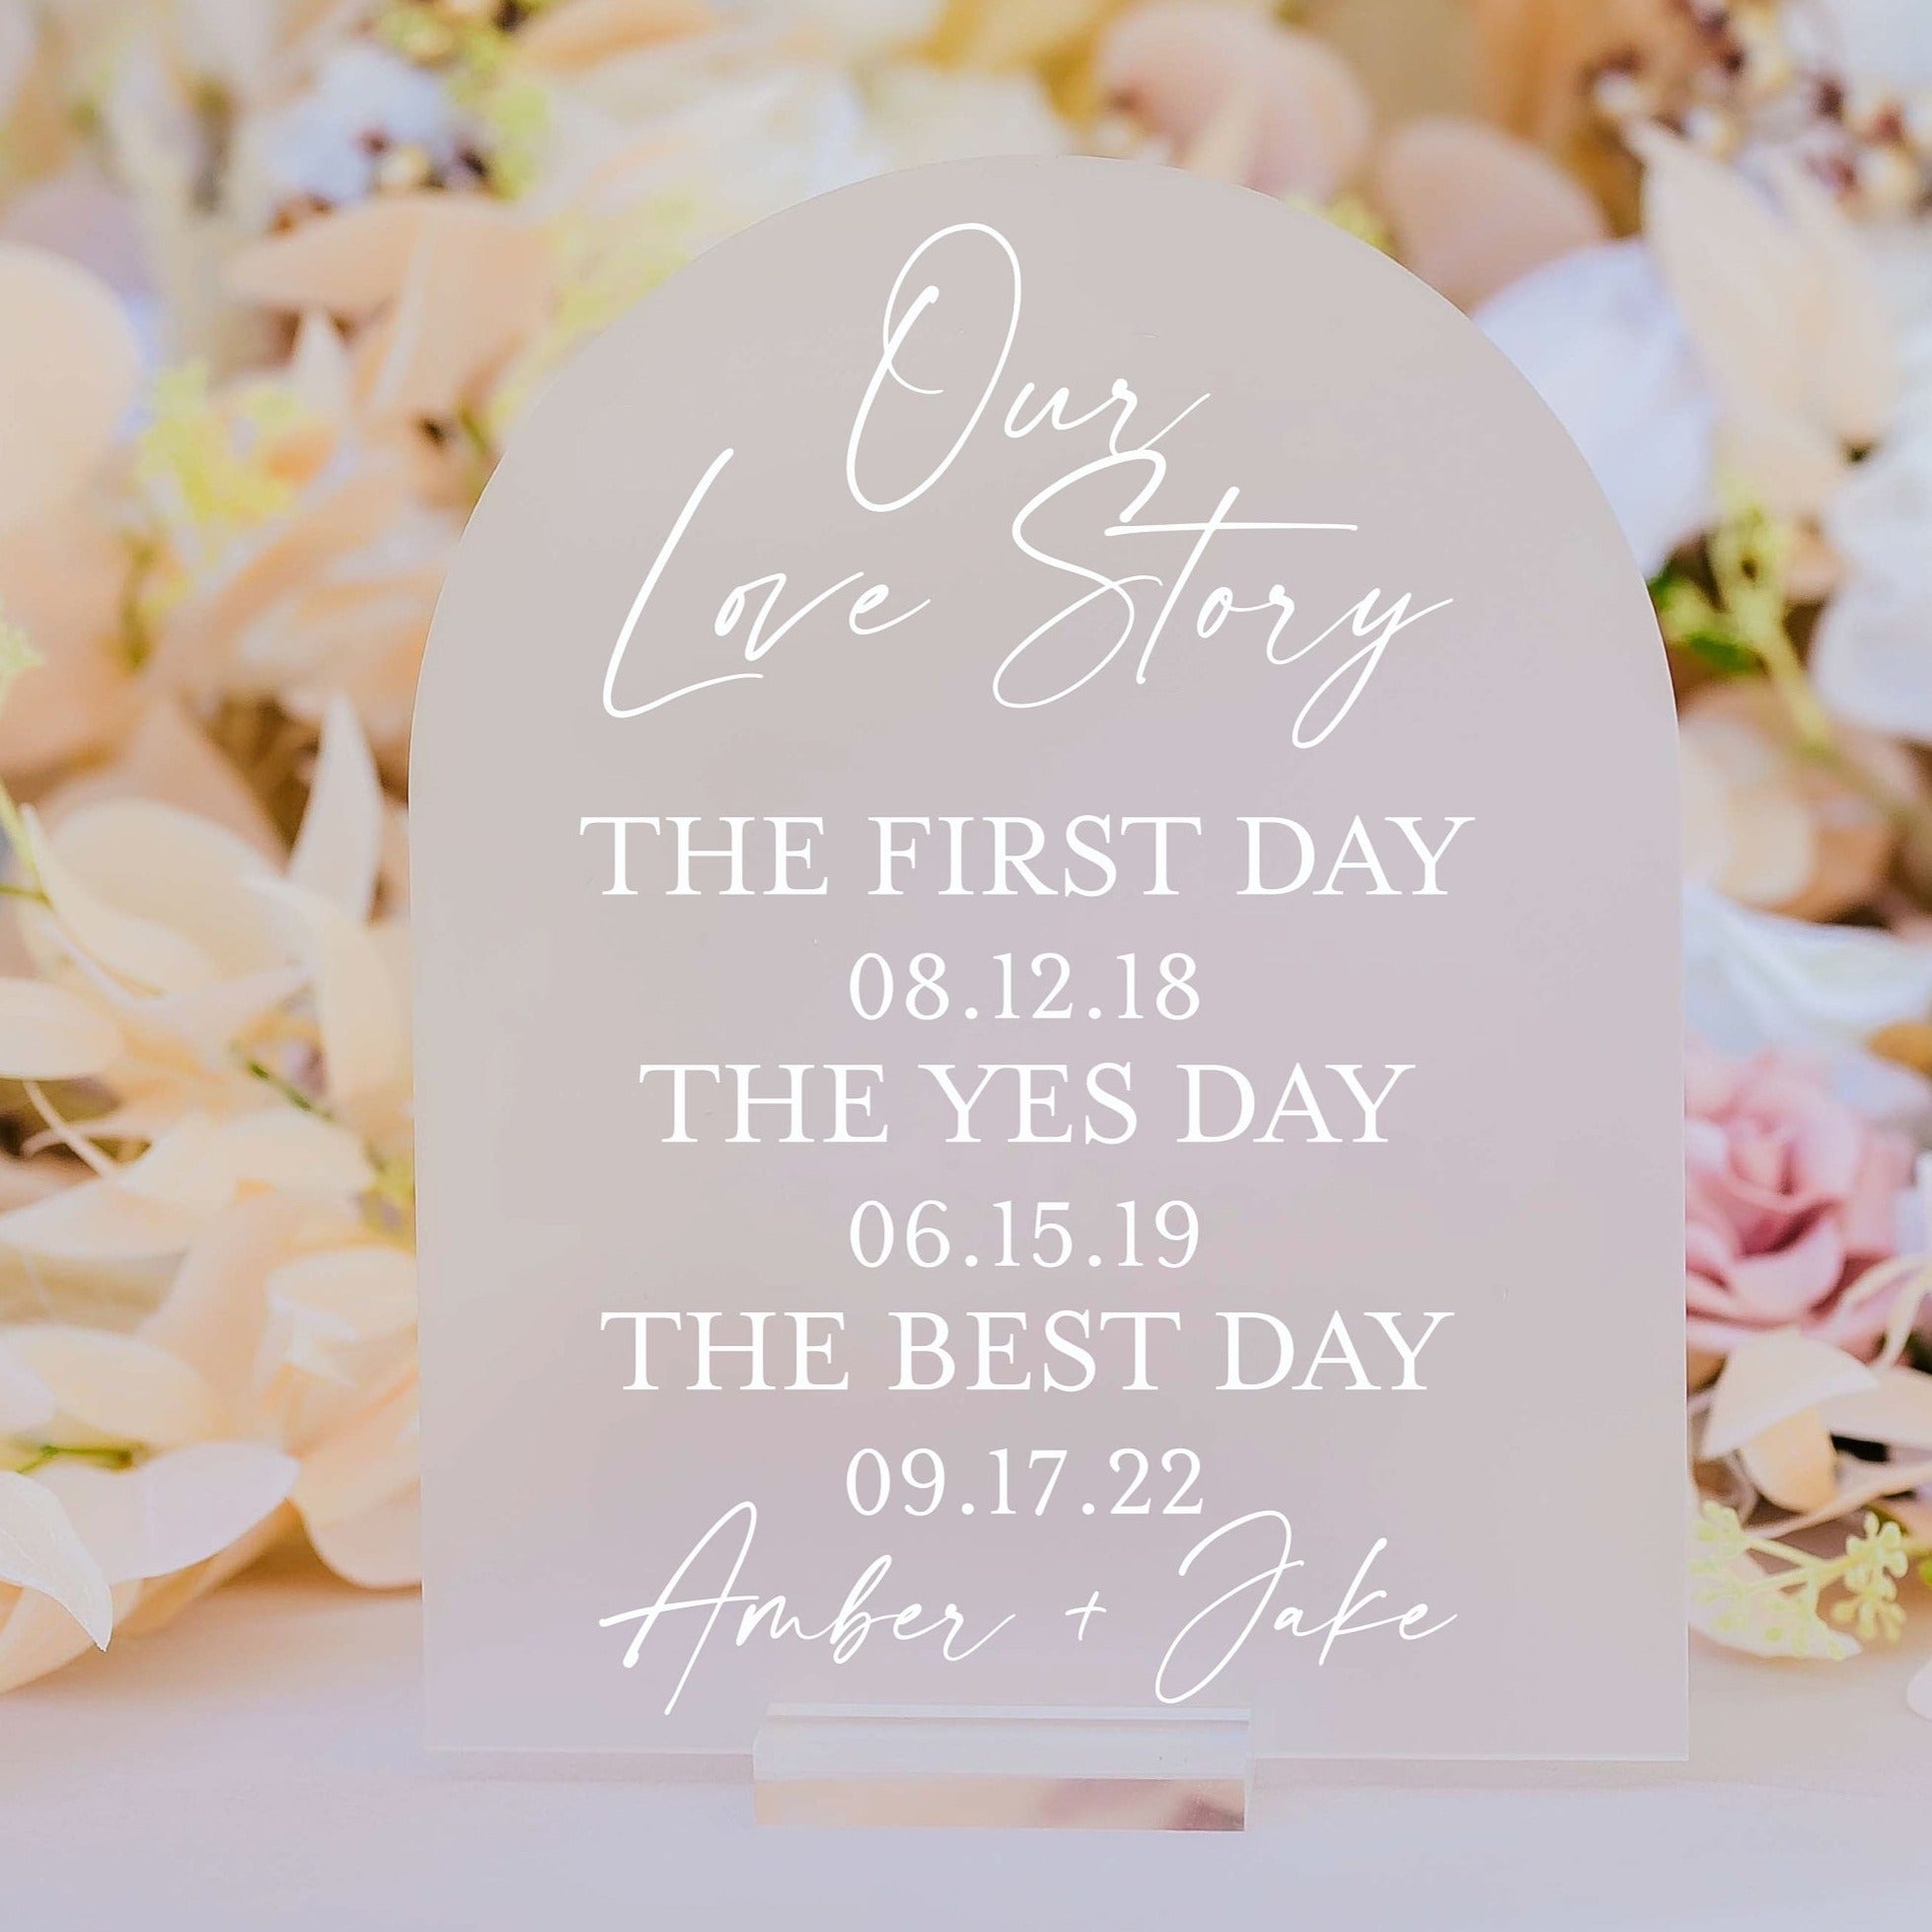 ARCH Our Love Story First Day, Yes Day, Best Day Wedding Acrylic SIgn